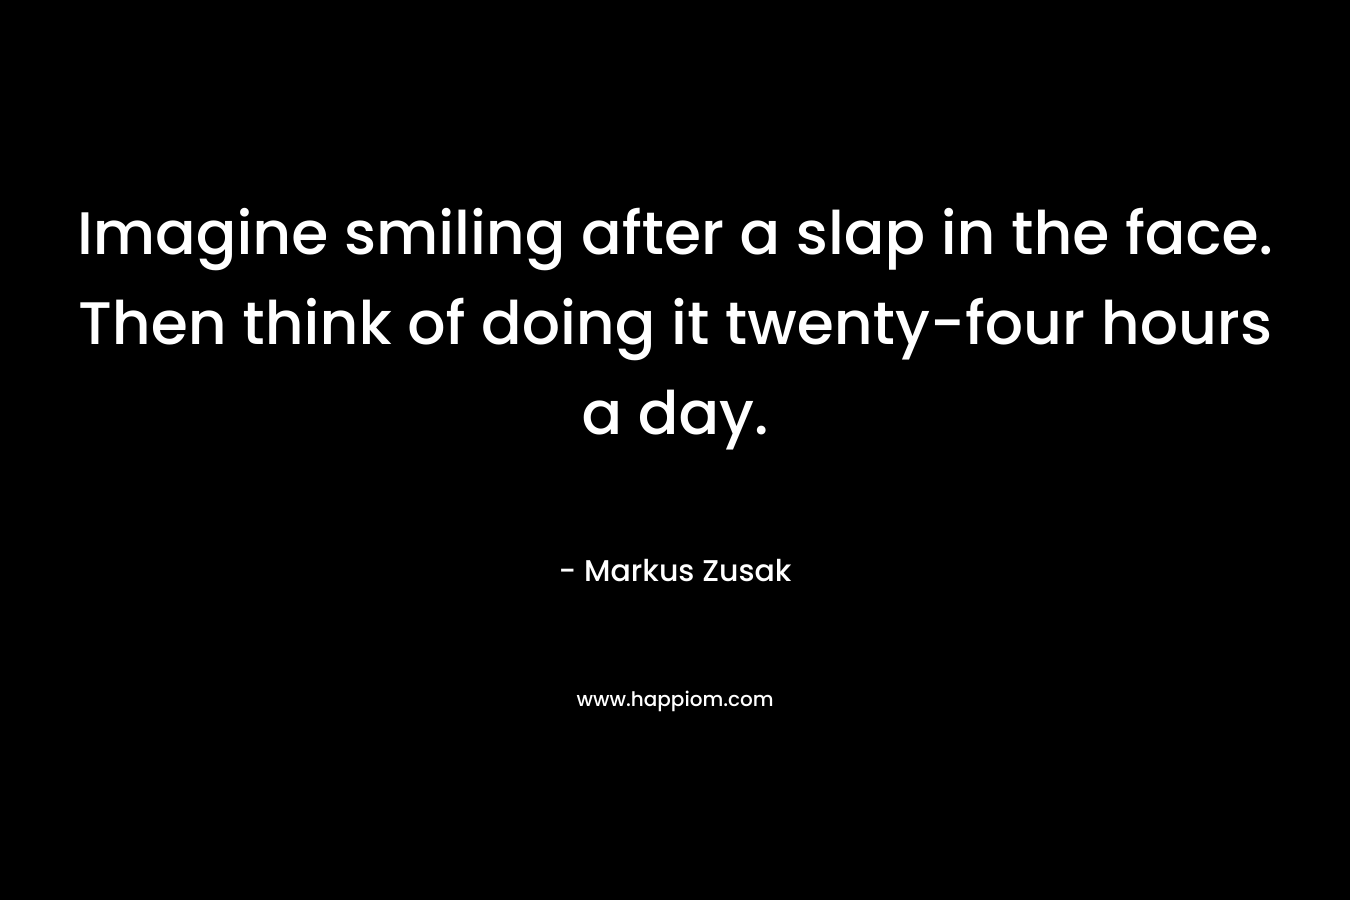 Imagine smiling after a slap in the face. Then think of doing it twenty-four hours a day.